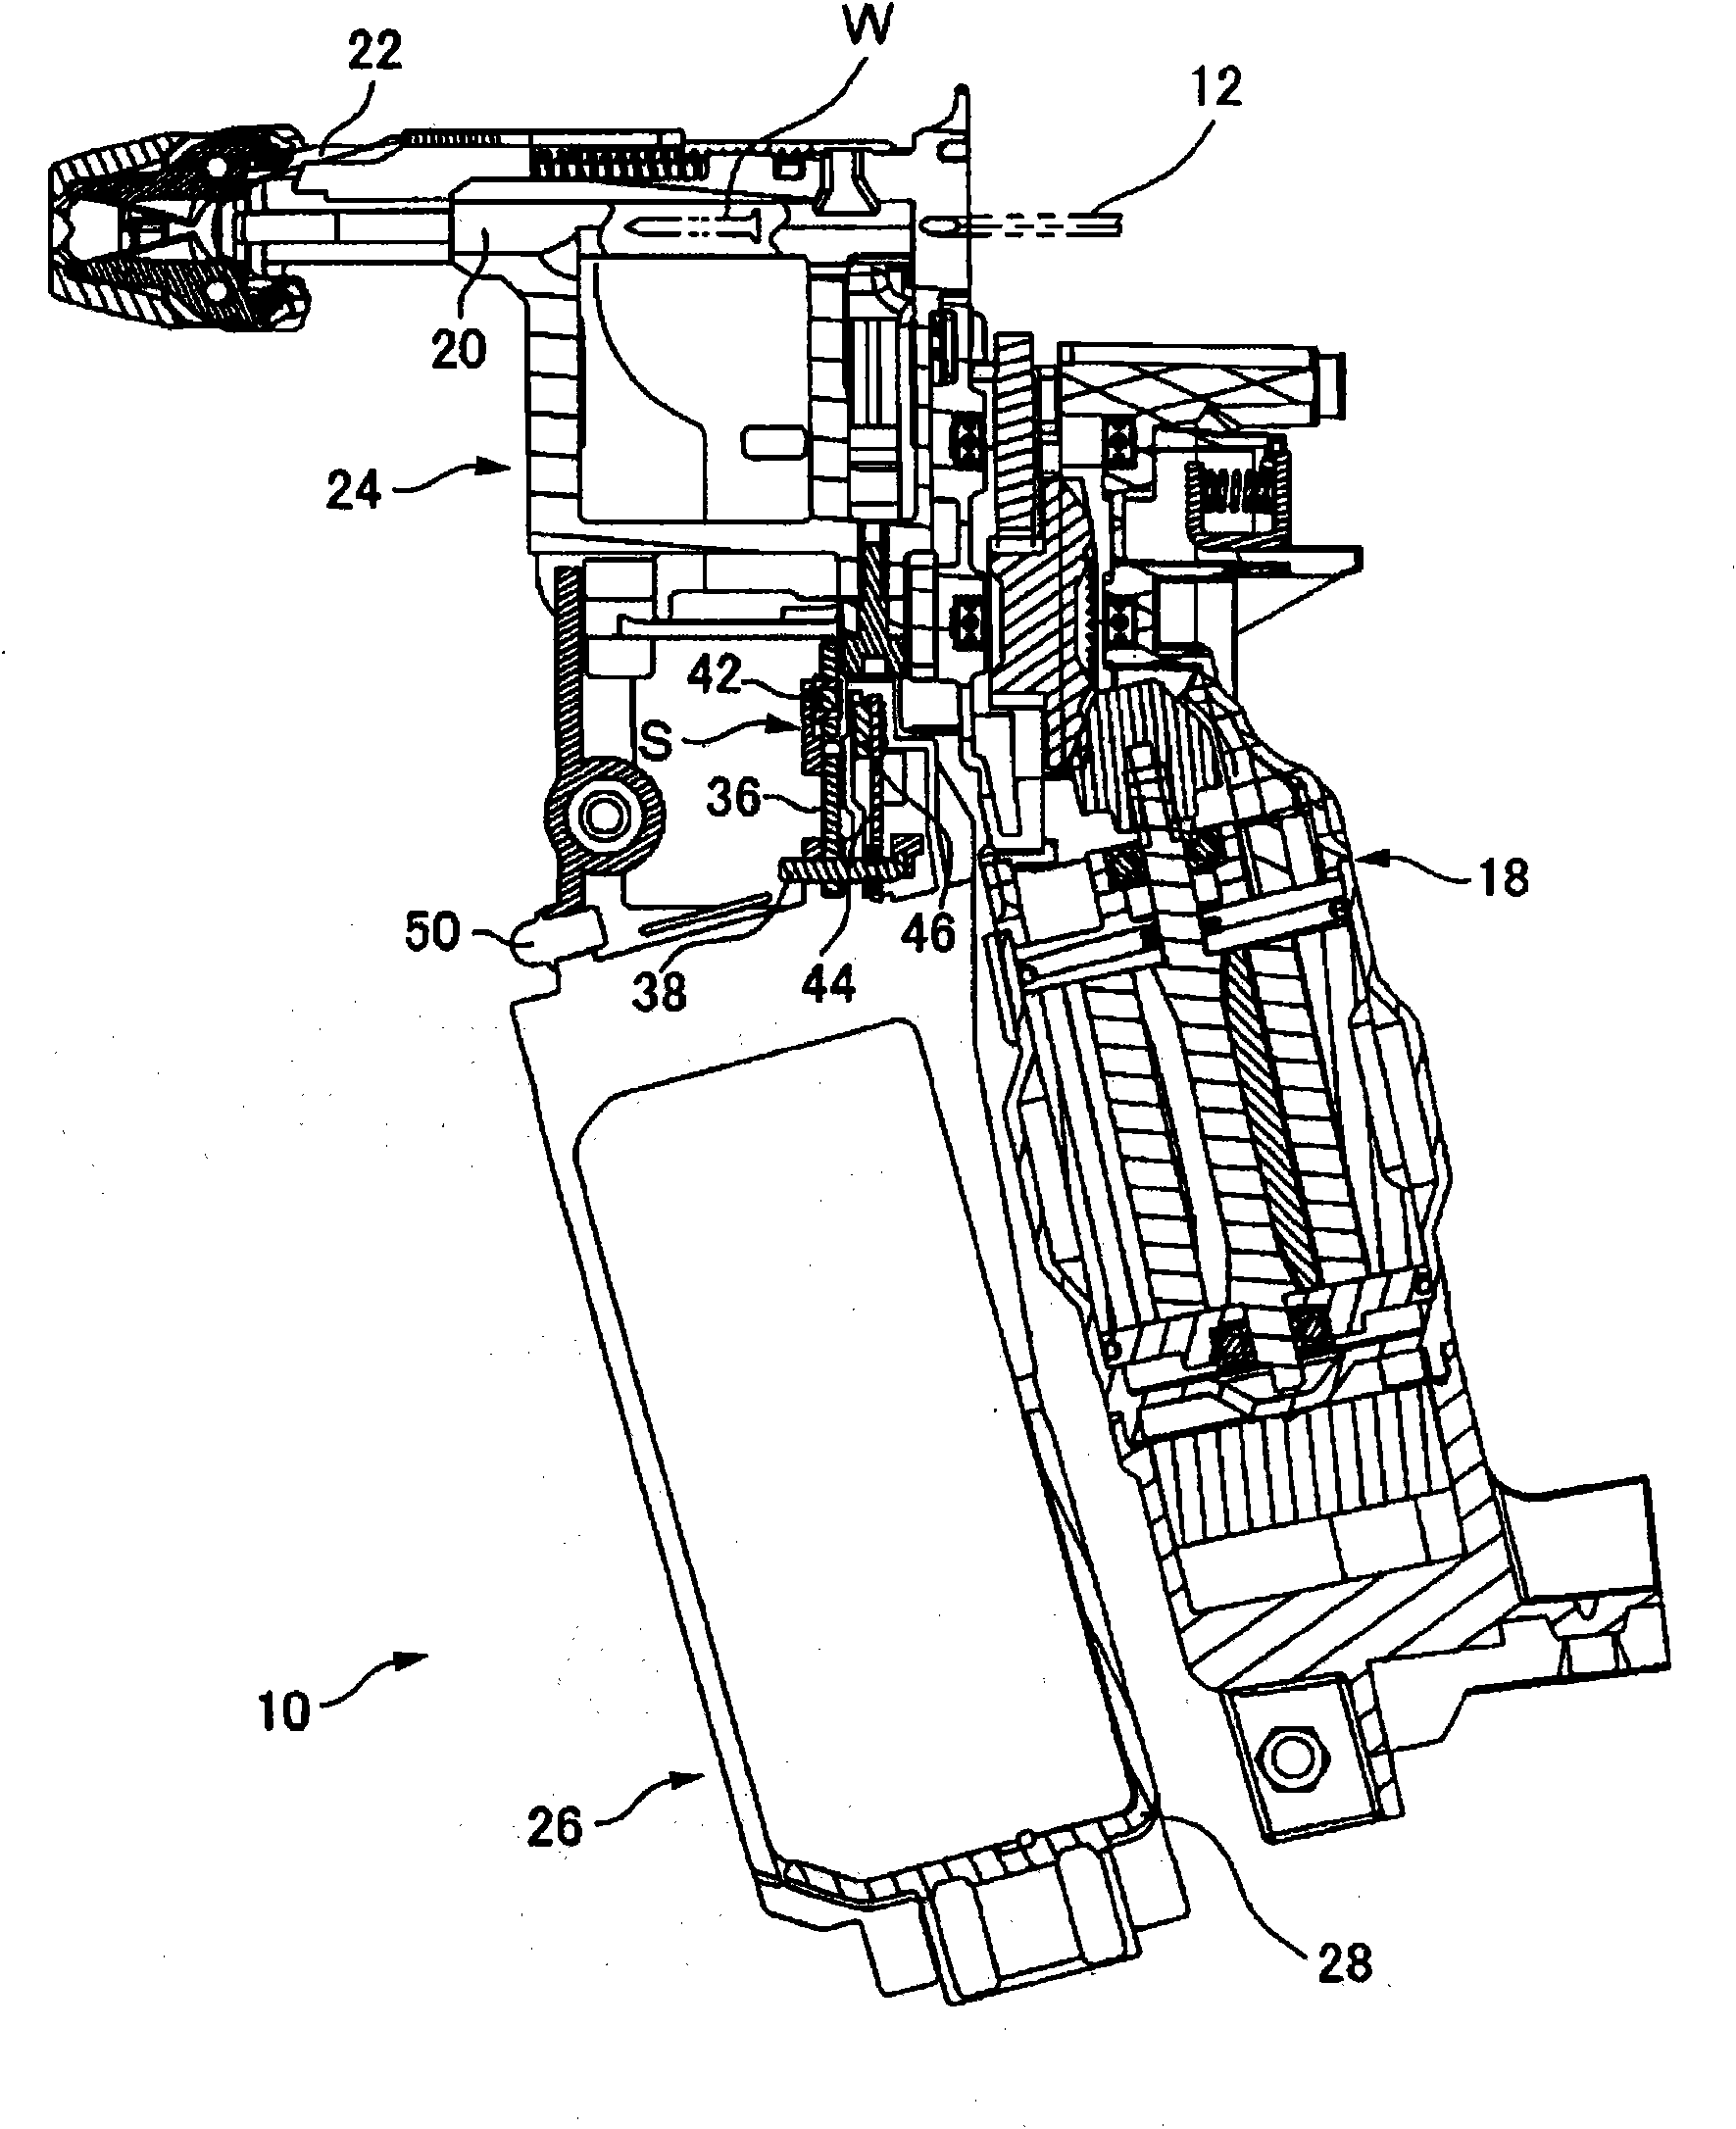 Handheld tool, remaining fastener quantity detection mechanism, remaining fastener quantity detection method, and method for conserving power